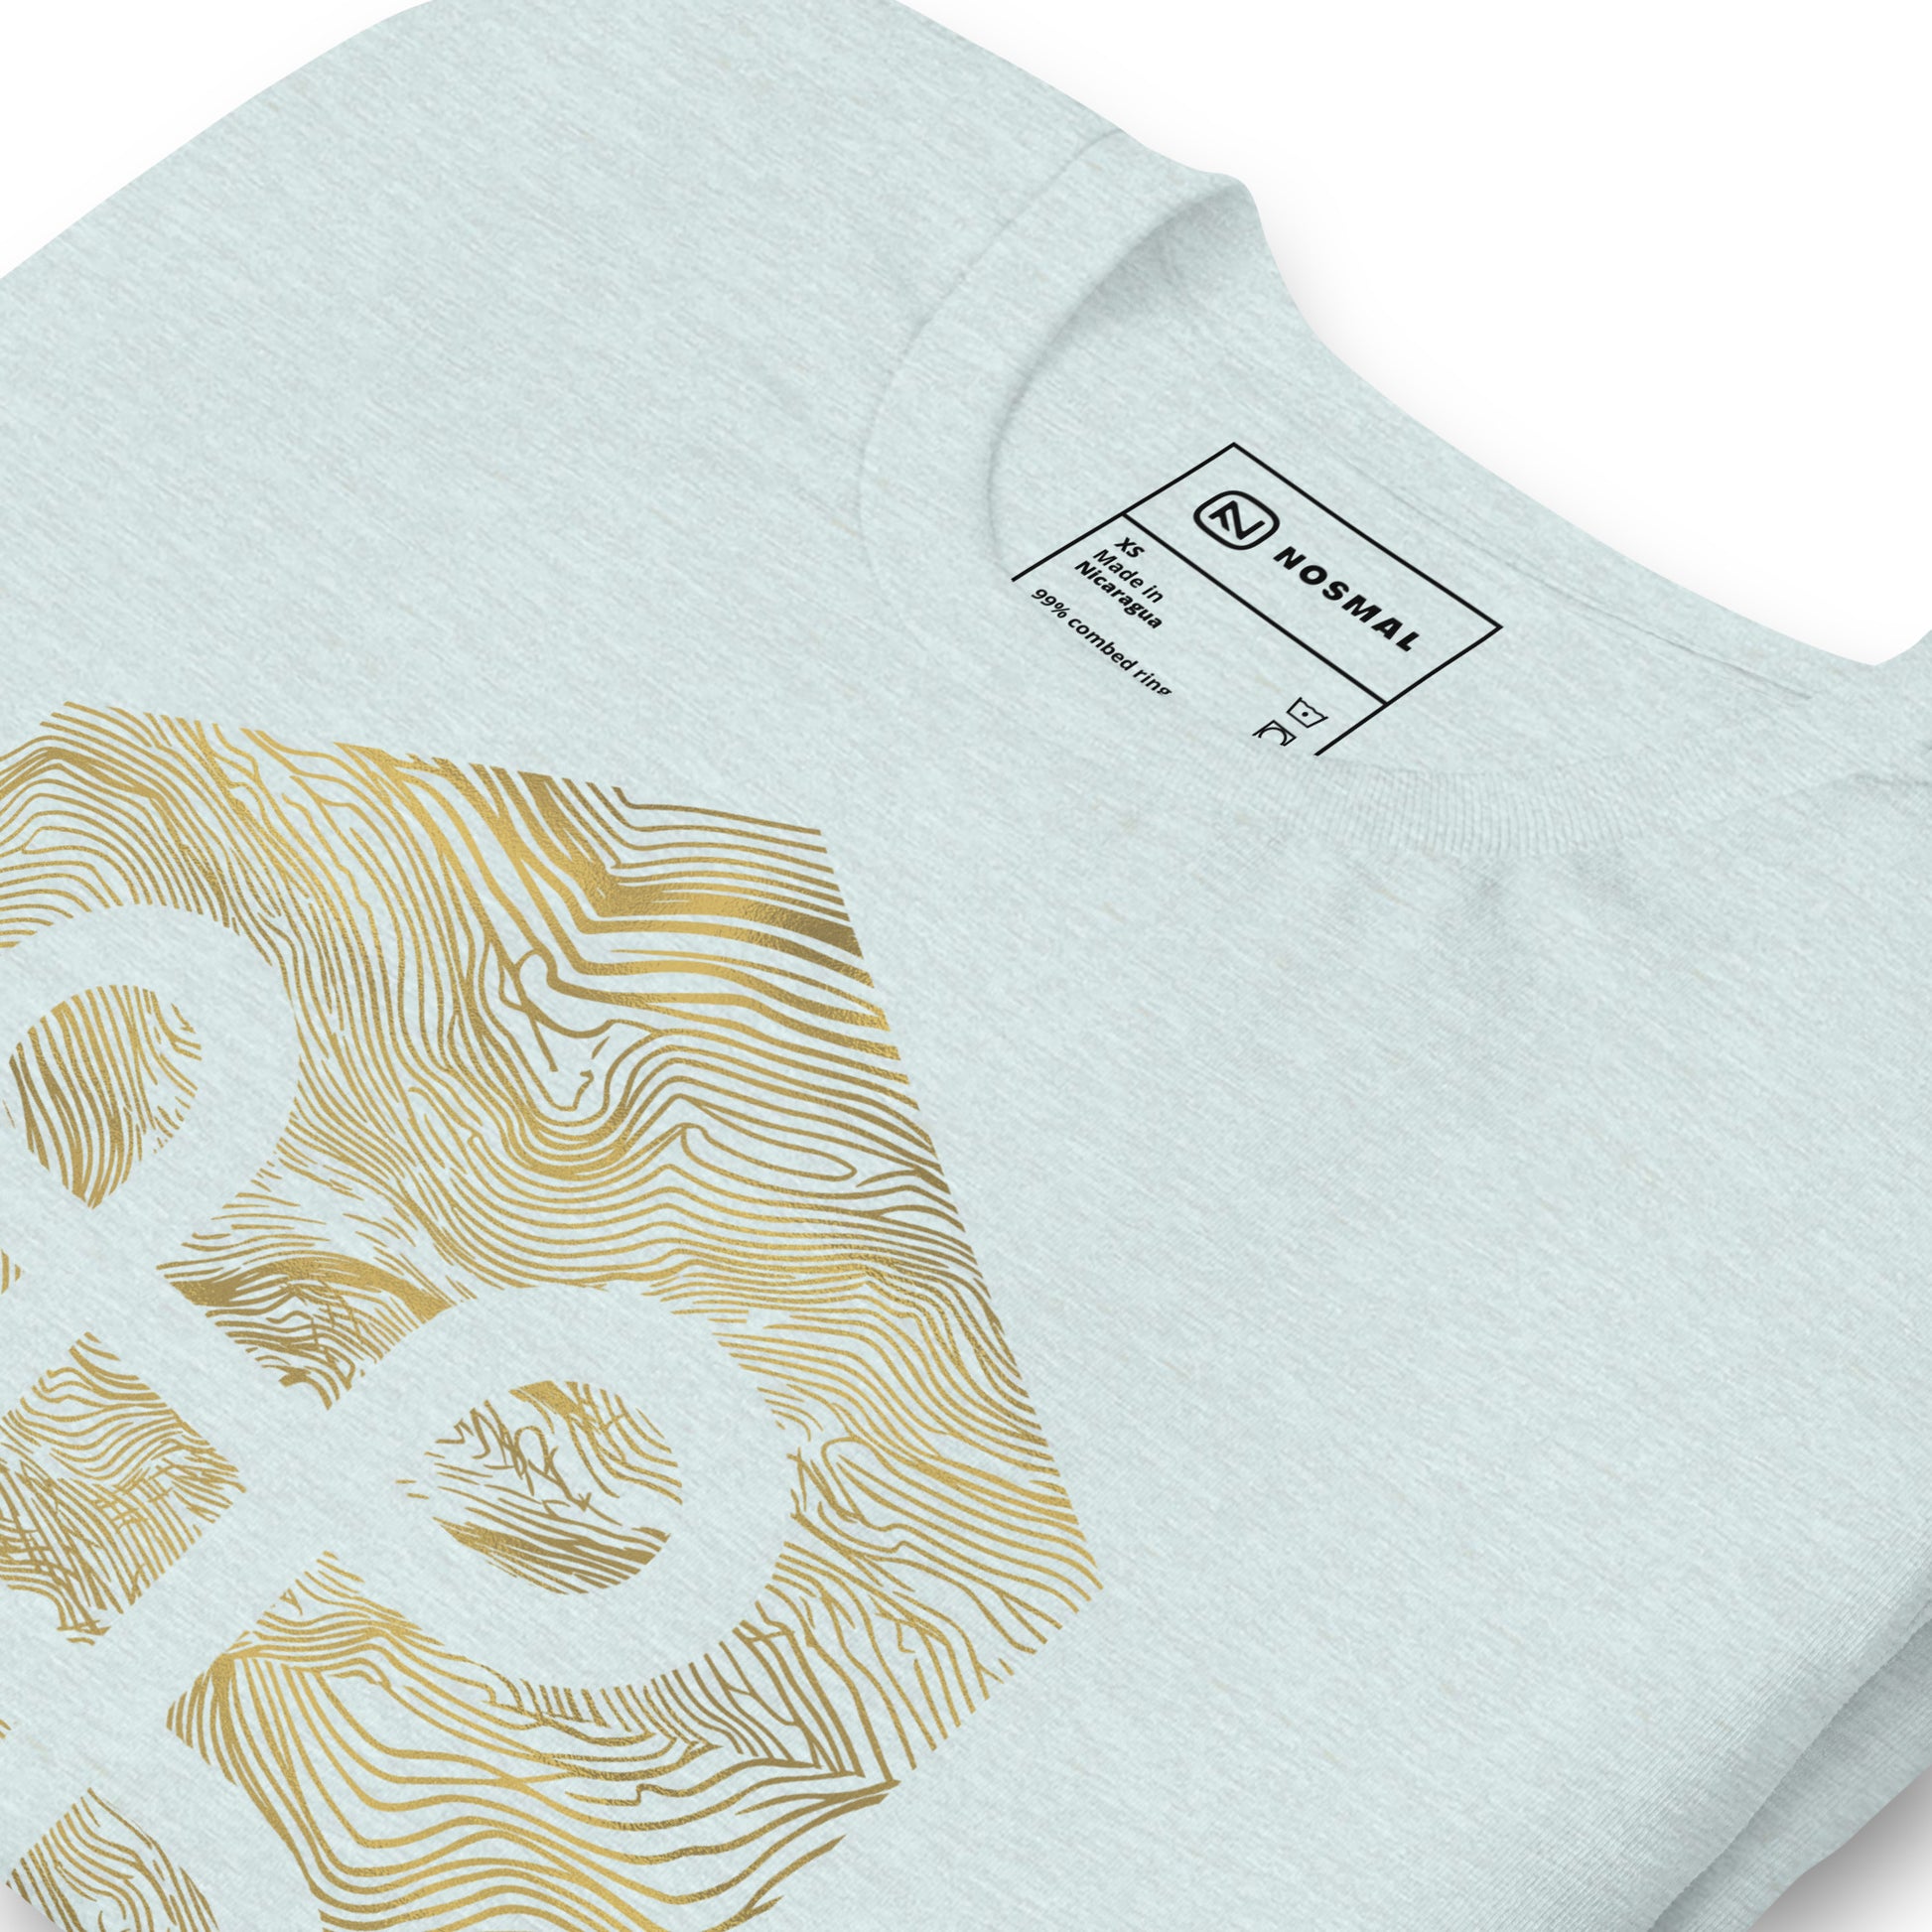 Angled close up shot of the commander gold design on heather prism ice blue unisex t-shirt.